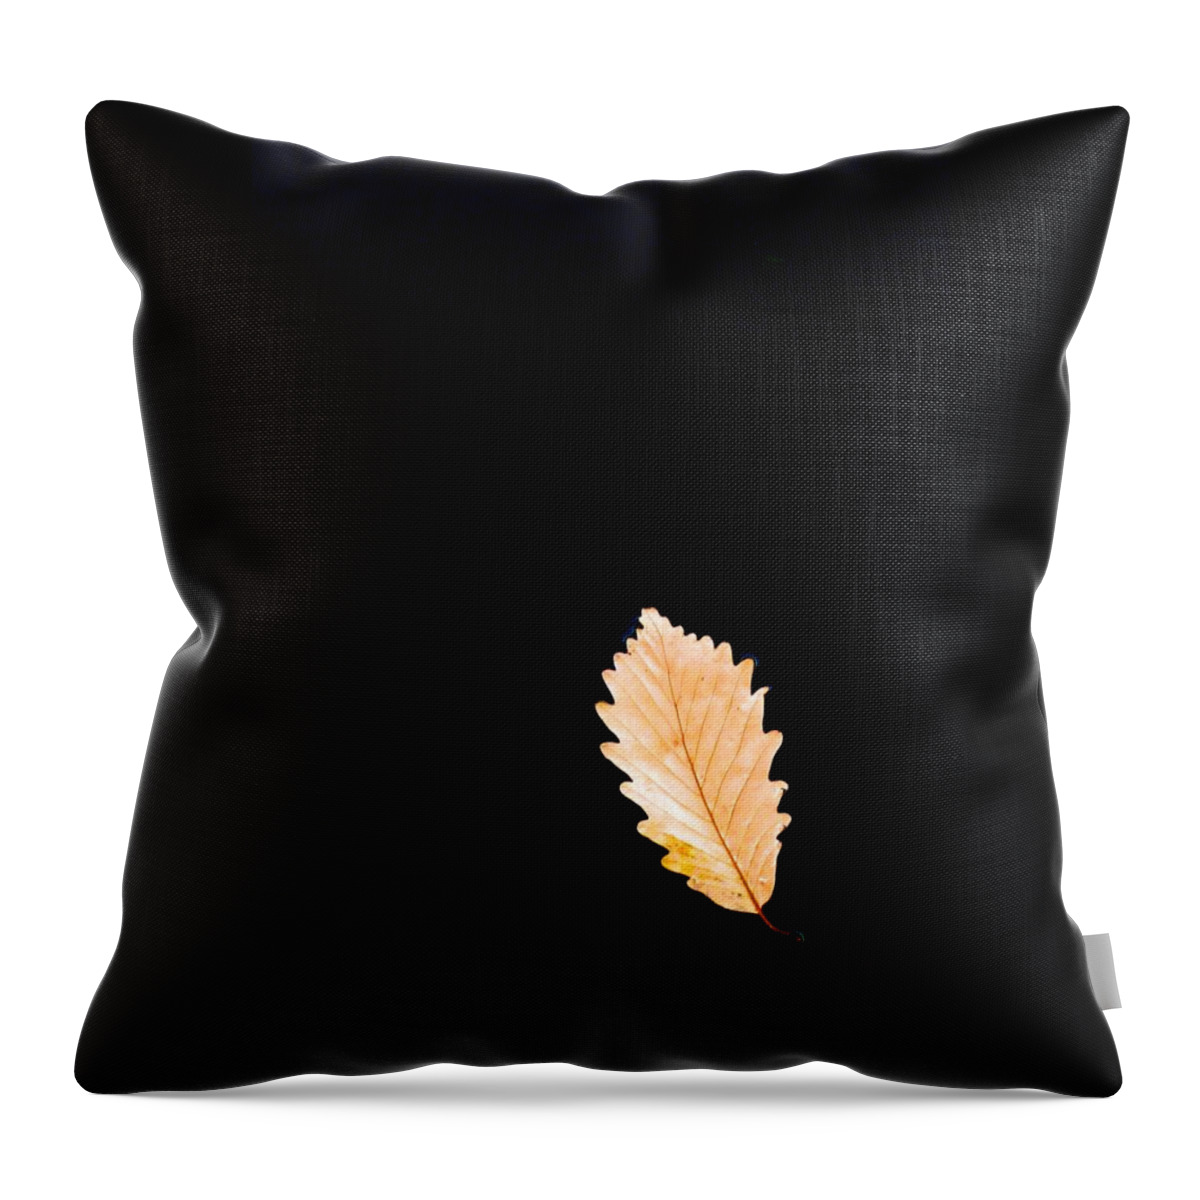  Throw Pillow featuring the photograph Suspended by Polly Castor